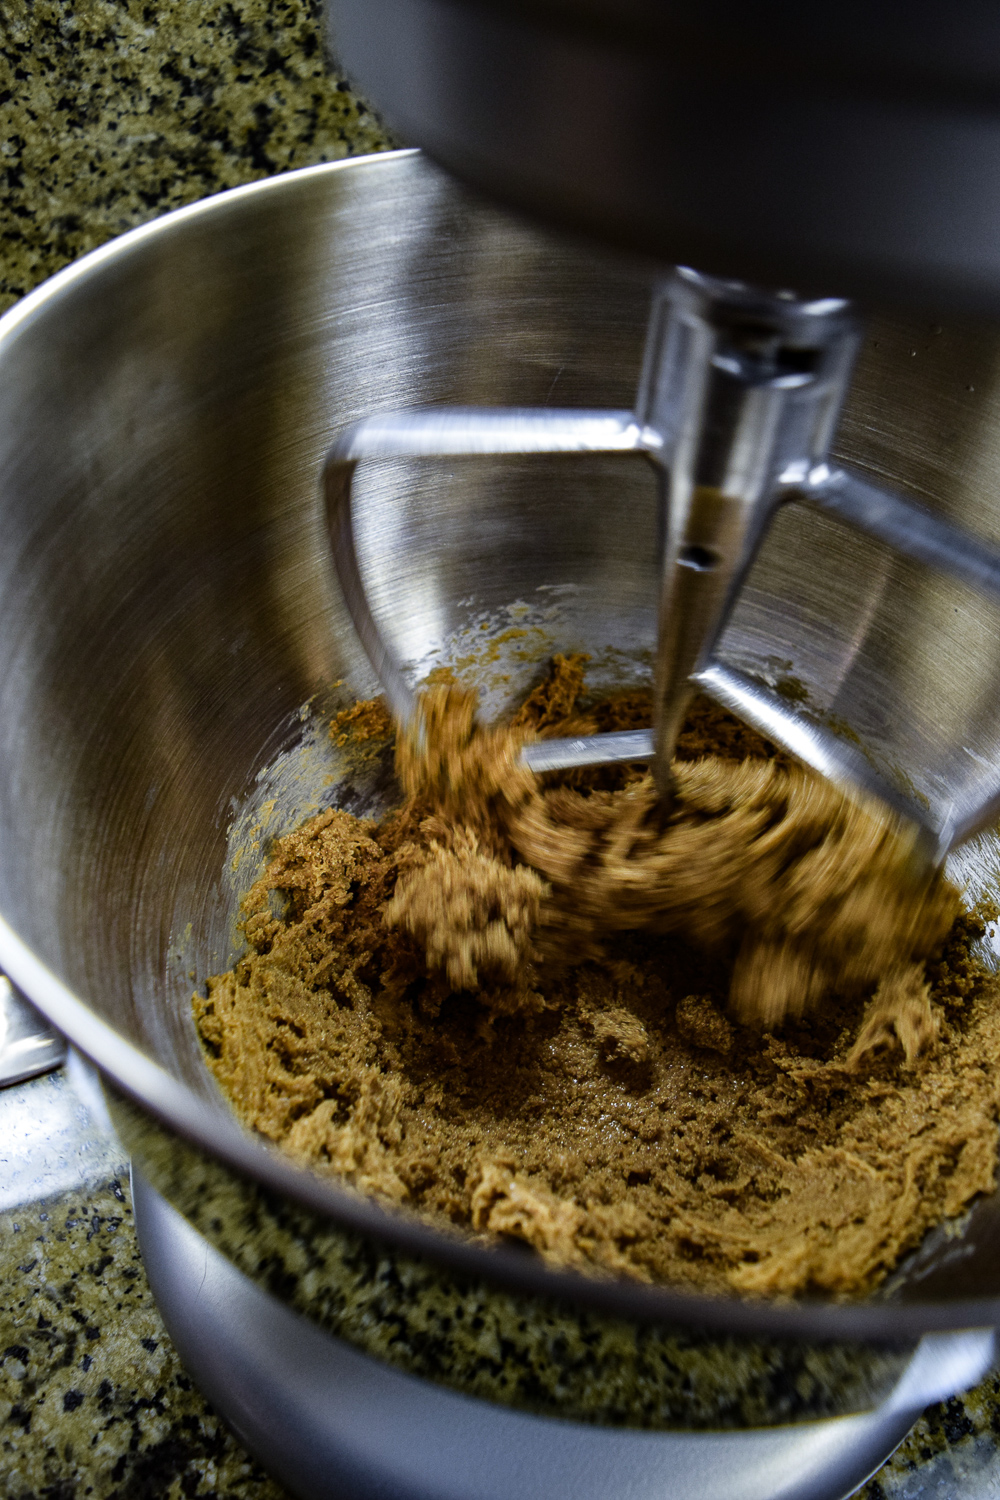 Creaming together the peanut butter and brown sugar in KitchenAid Mixer bowl in action